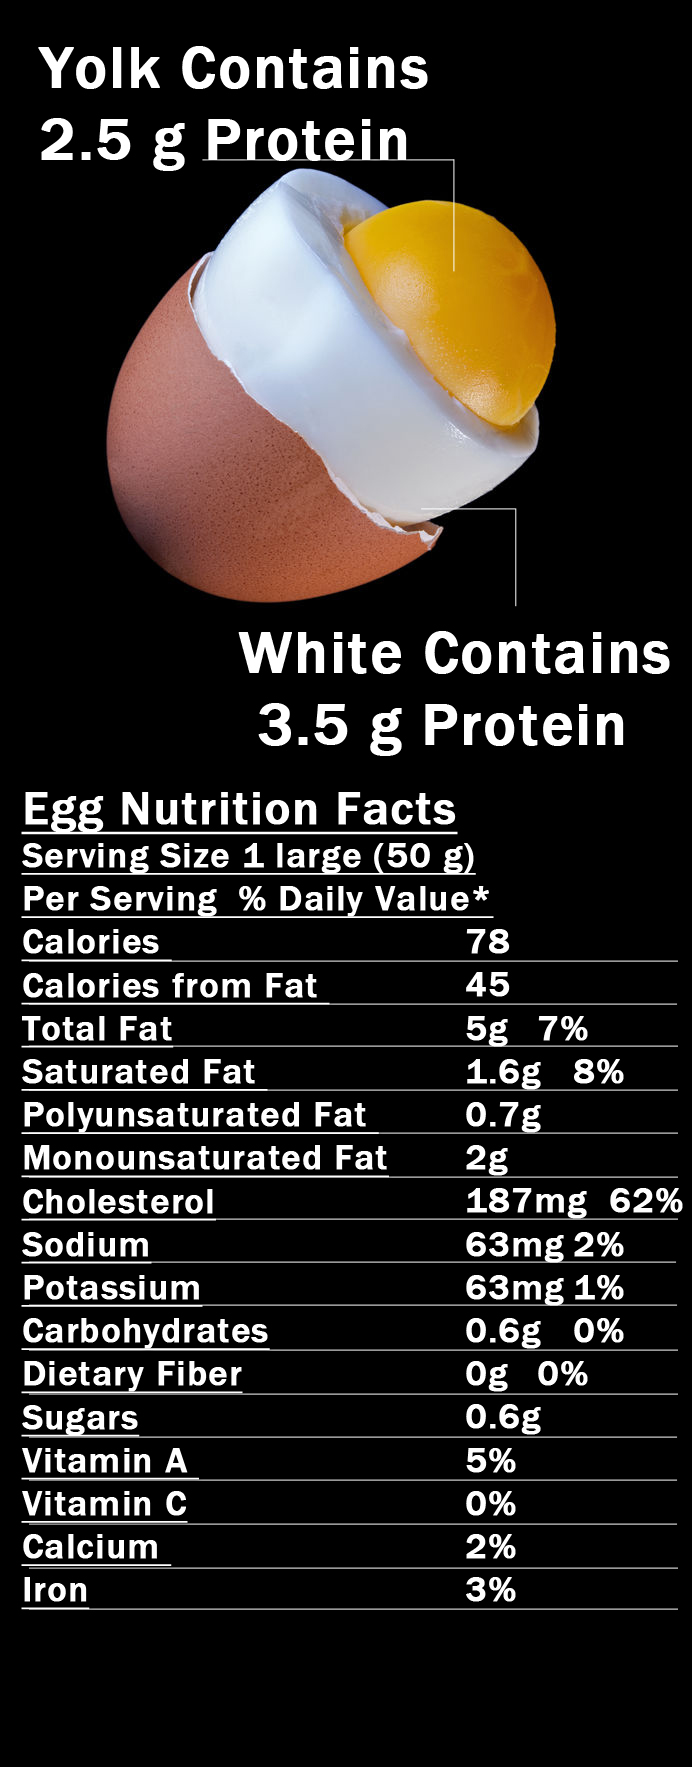 nutritional value of egg protein in yolk vs white best sources of protein